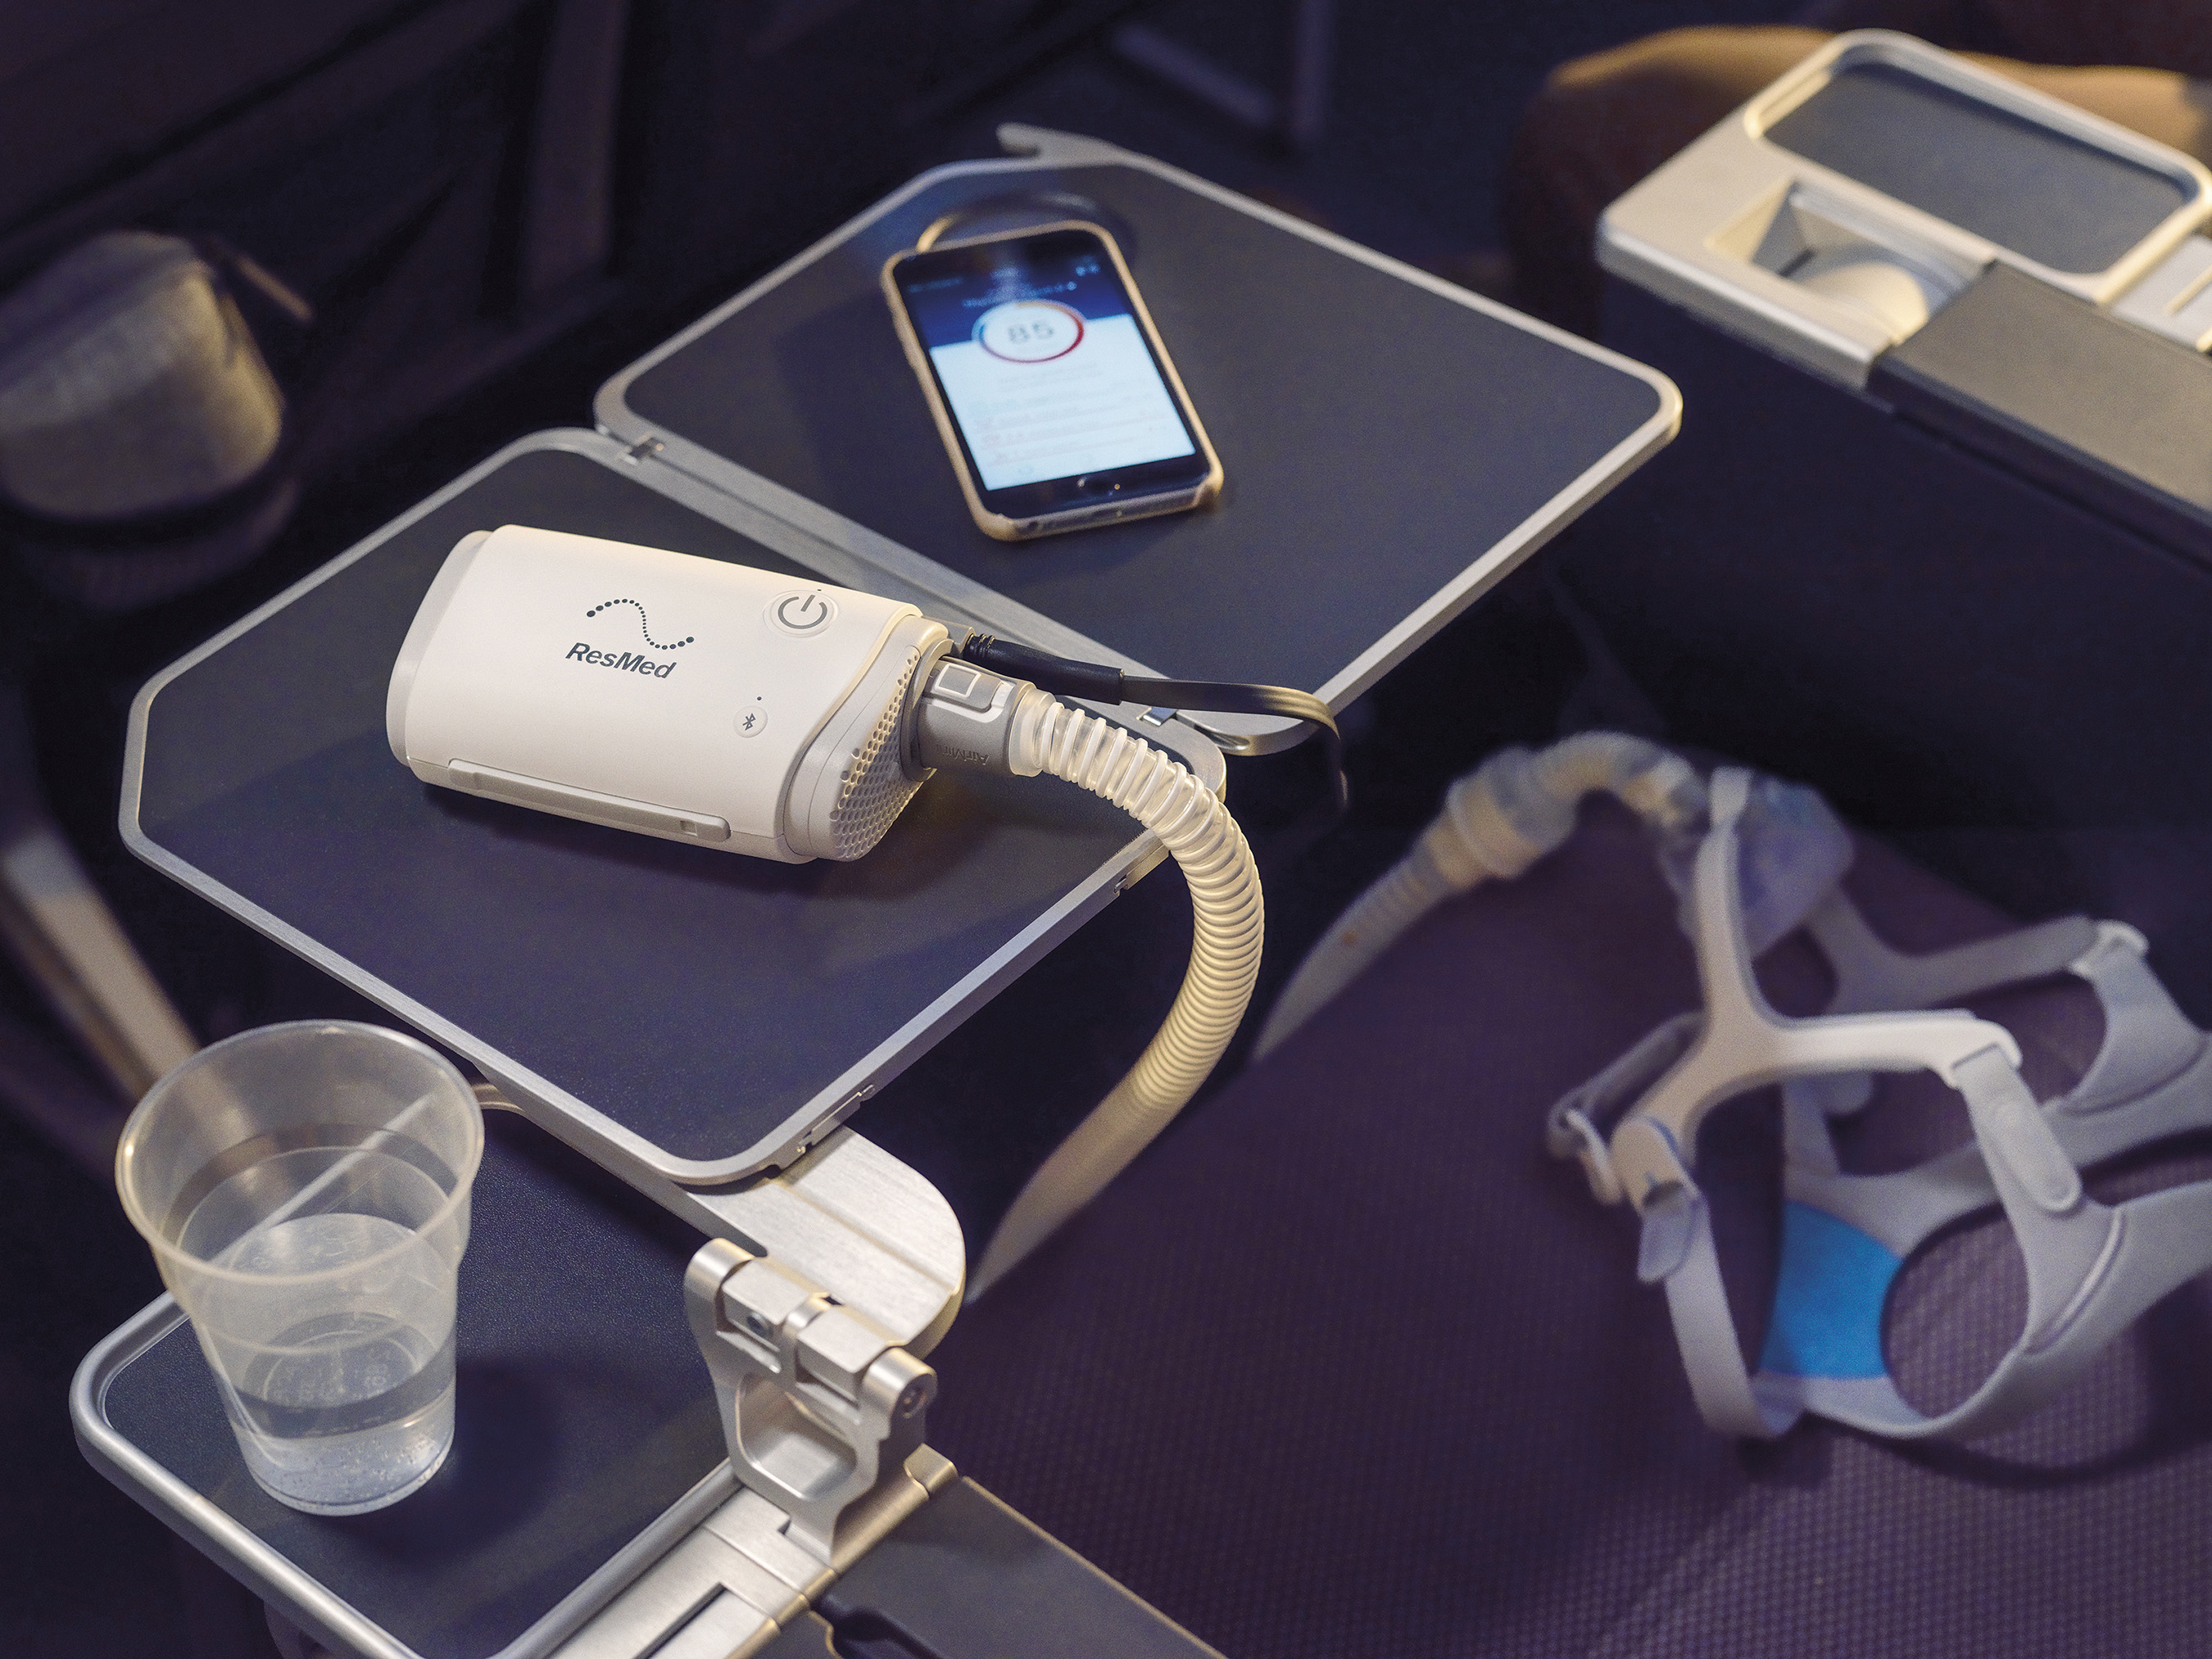 AirMini on a plane tray table